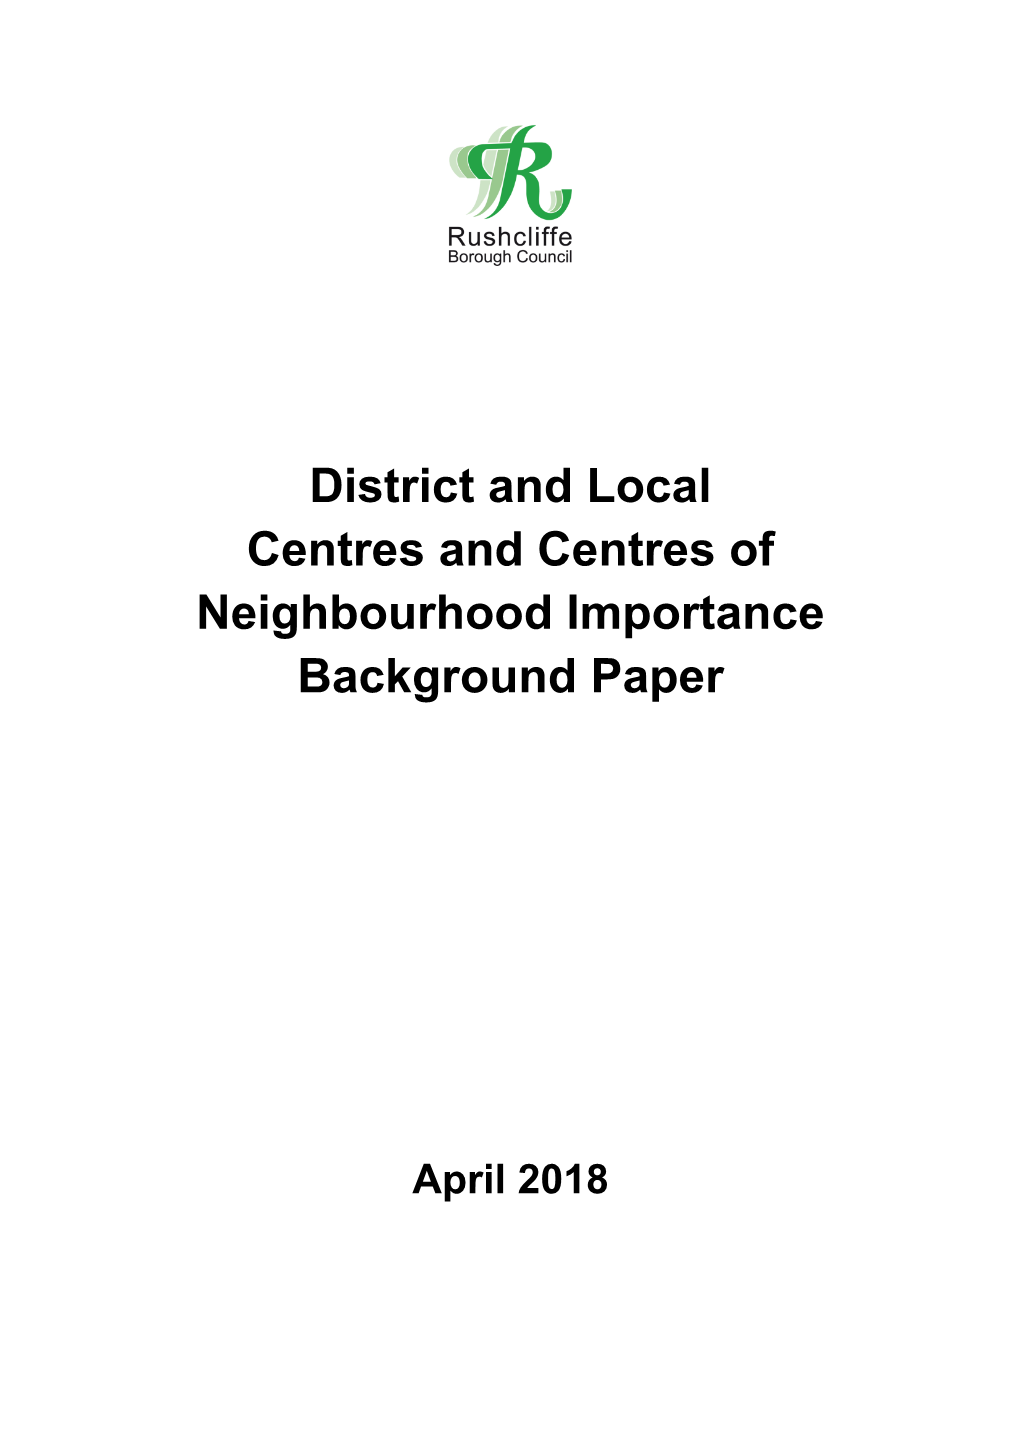 District and Local Centres and Centres of Neighbourhood Importance Background Paper